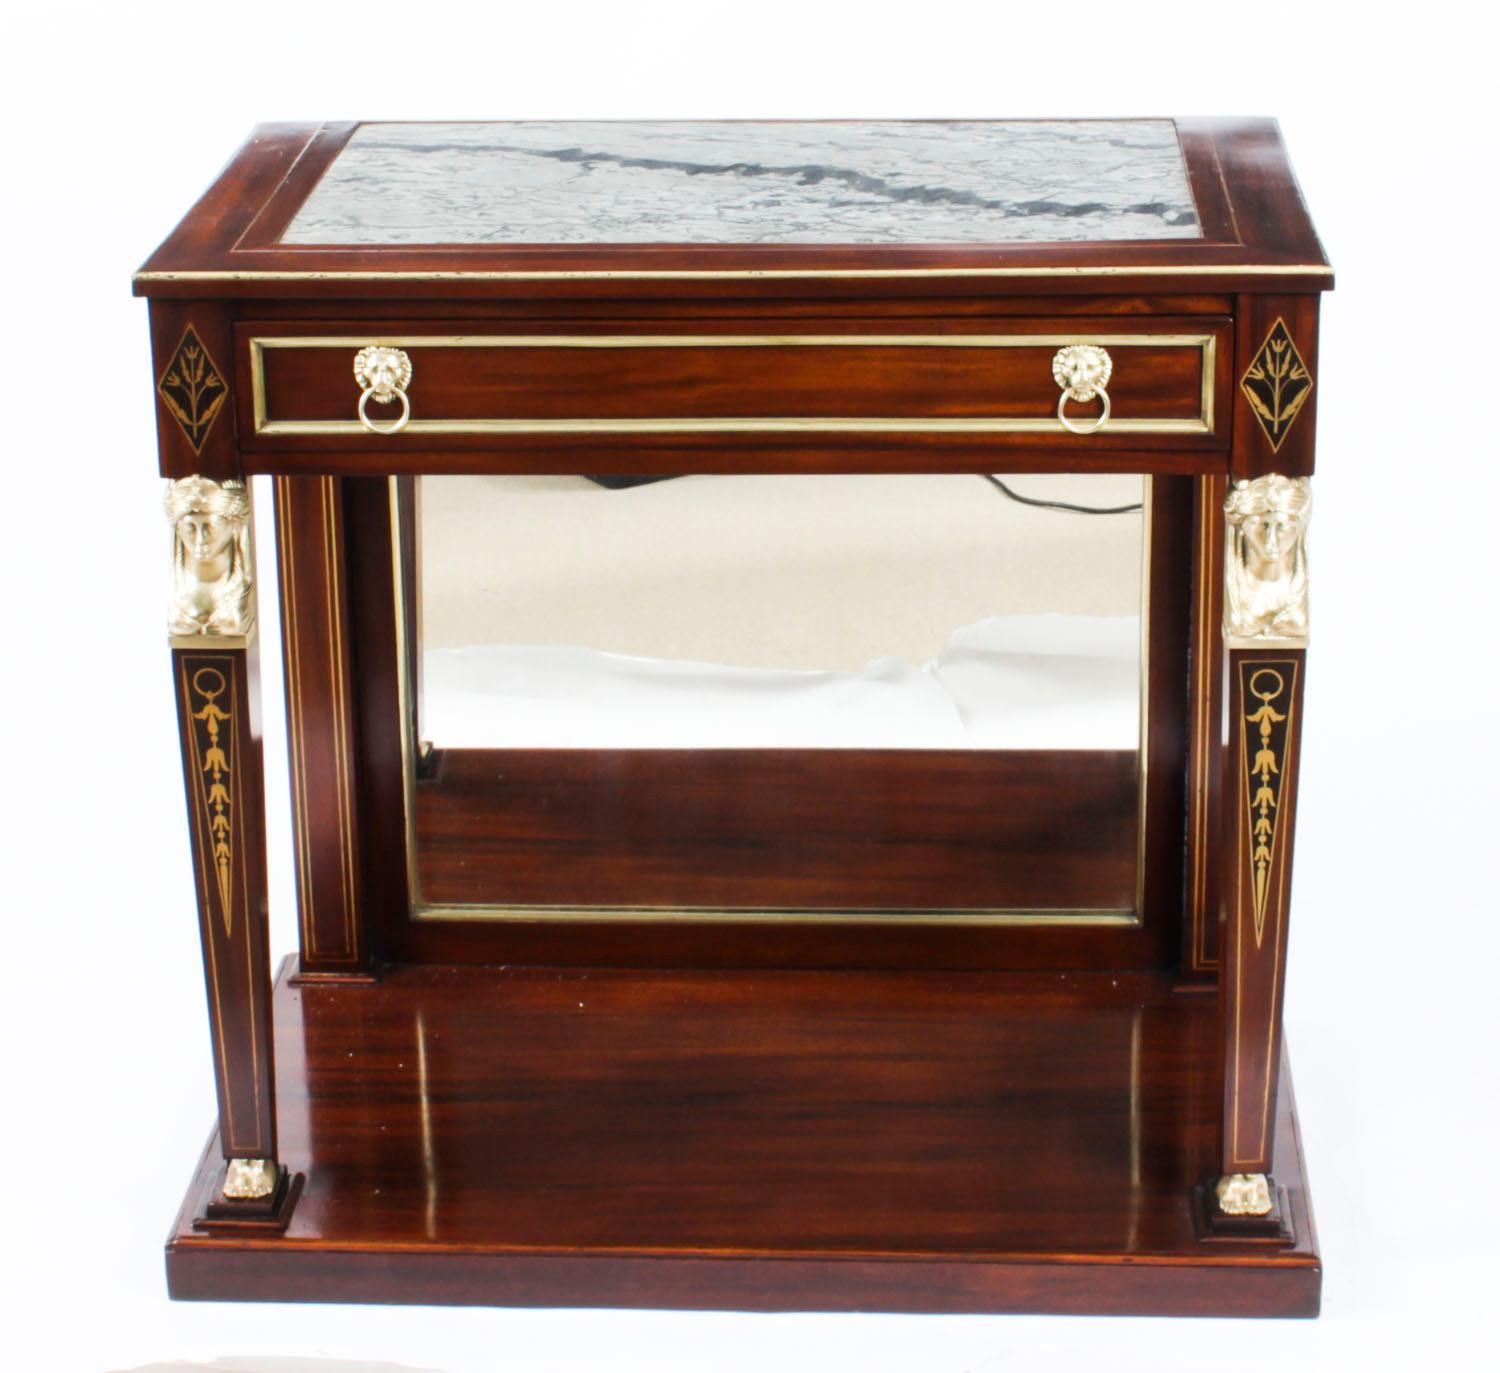 This is an elegant antique English Regency mahogany and ormolu mounted console table with inset marble top, circa 1820 in date.

This magnificent console table has beautiful decorative brass inlaid lozenges and ormolu Egyptian revival neo-classical